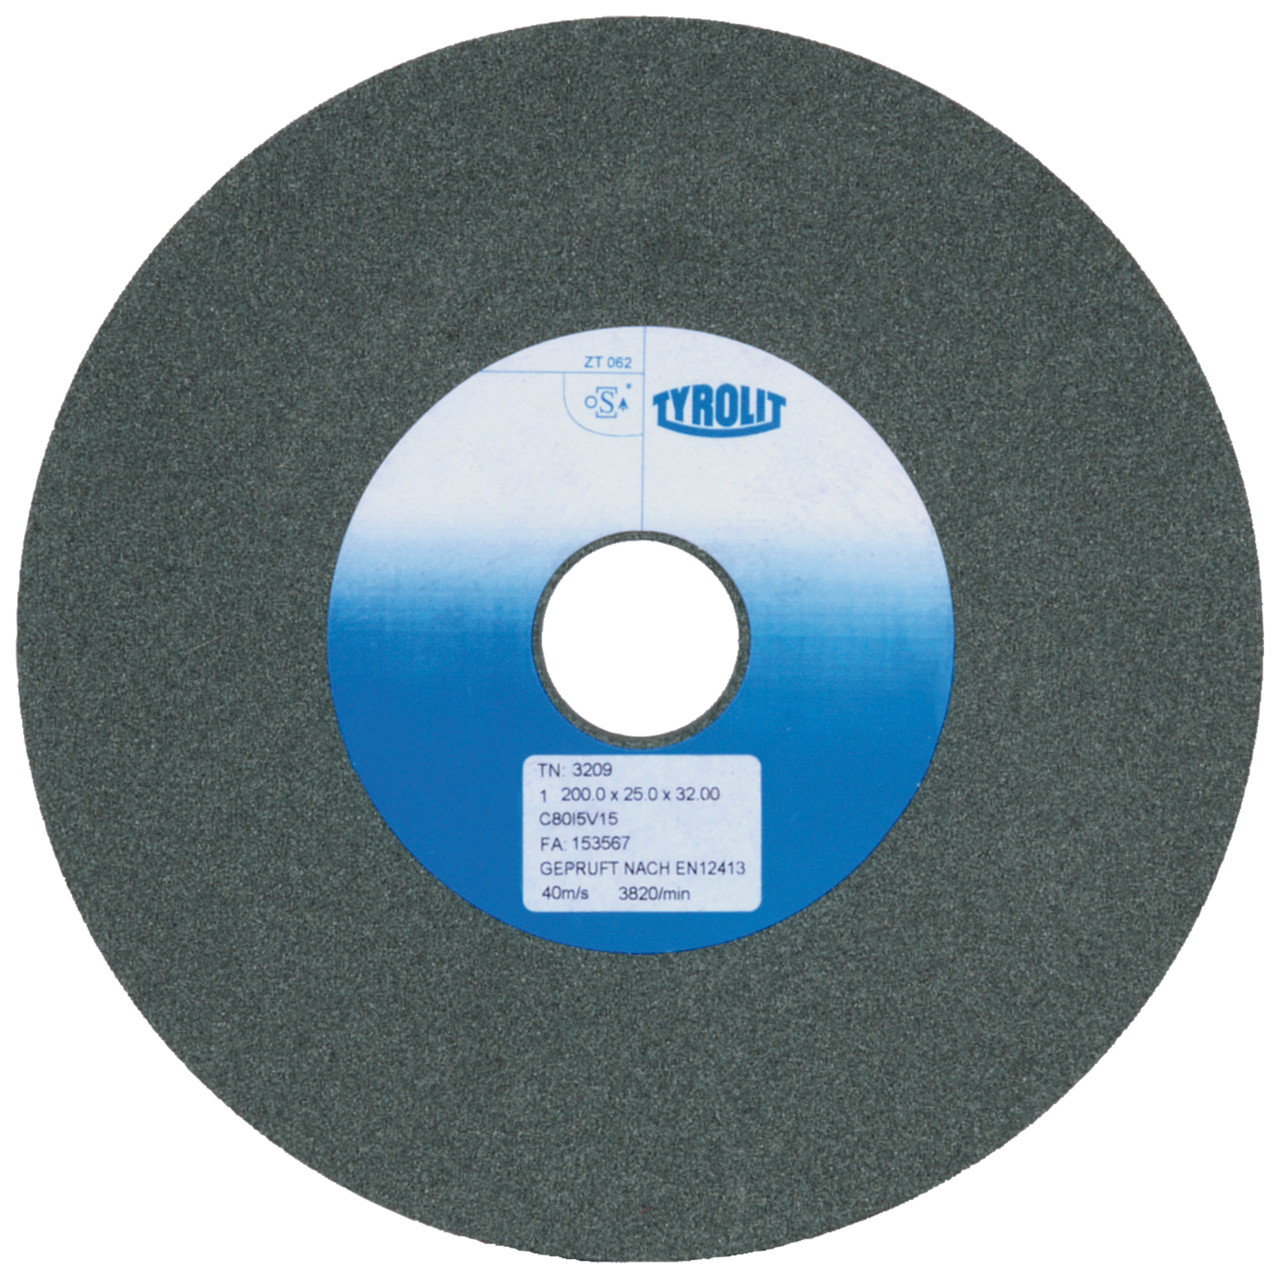 Tyrolit Conventional ceramic grinding discs DxDxH 150x16x32 For carbide and cast iron, shape: 1, Art. 56155